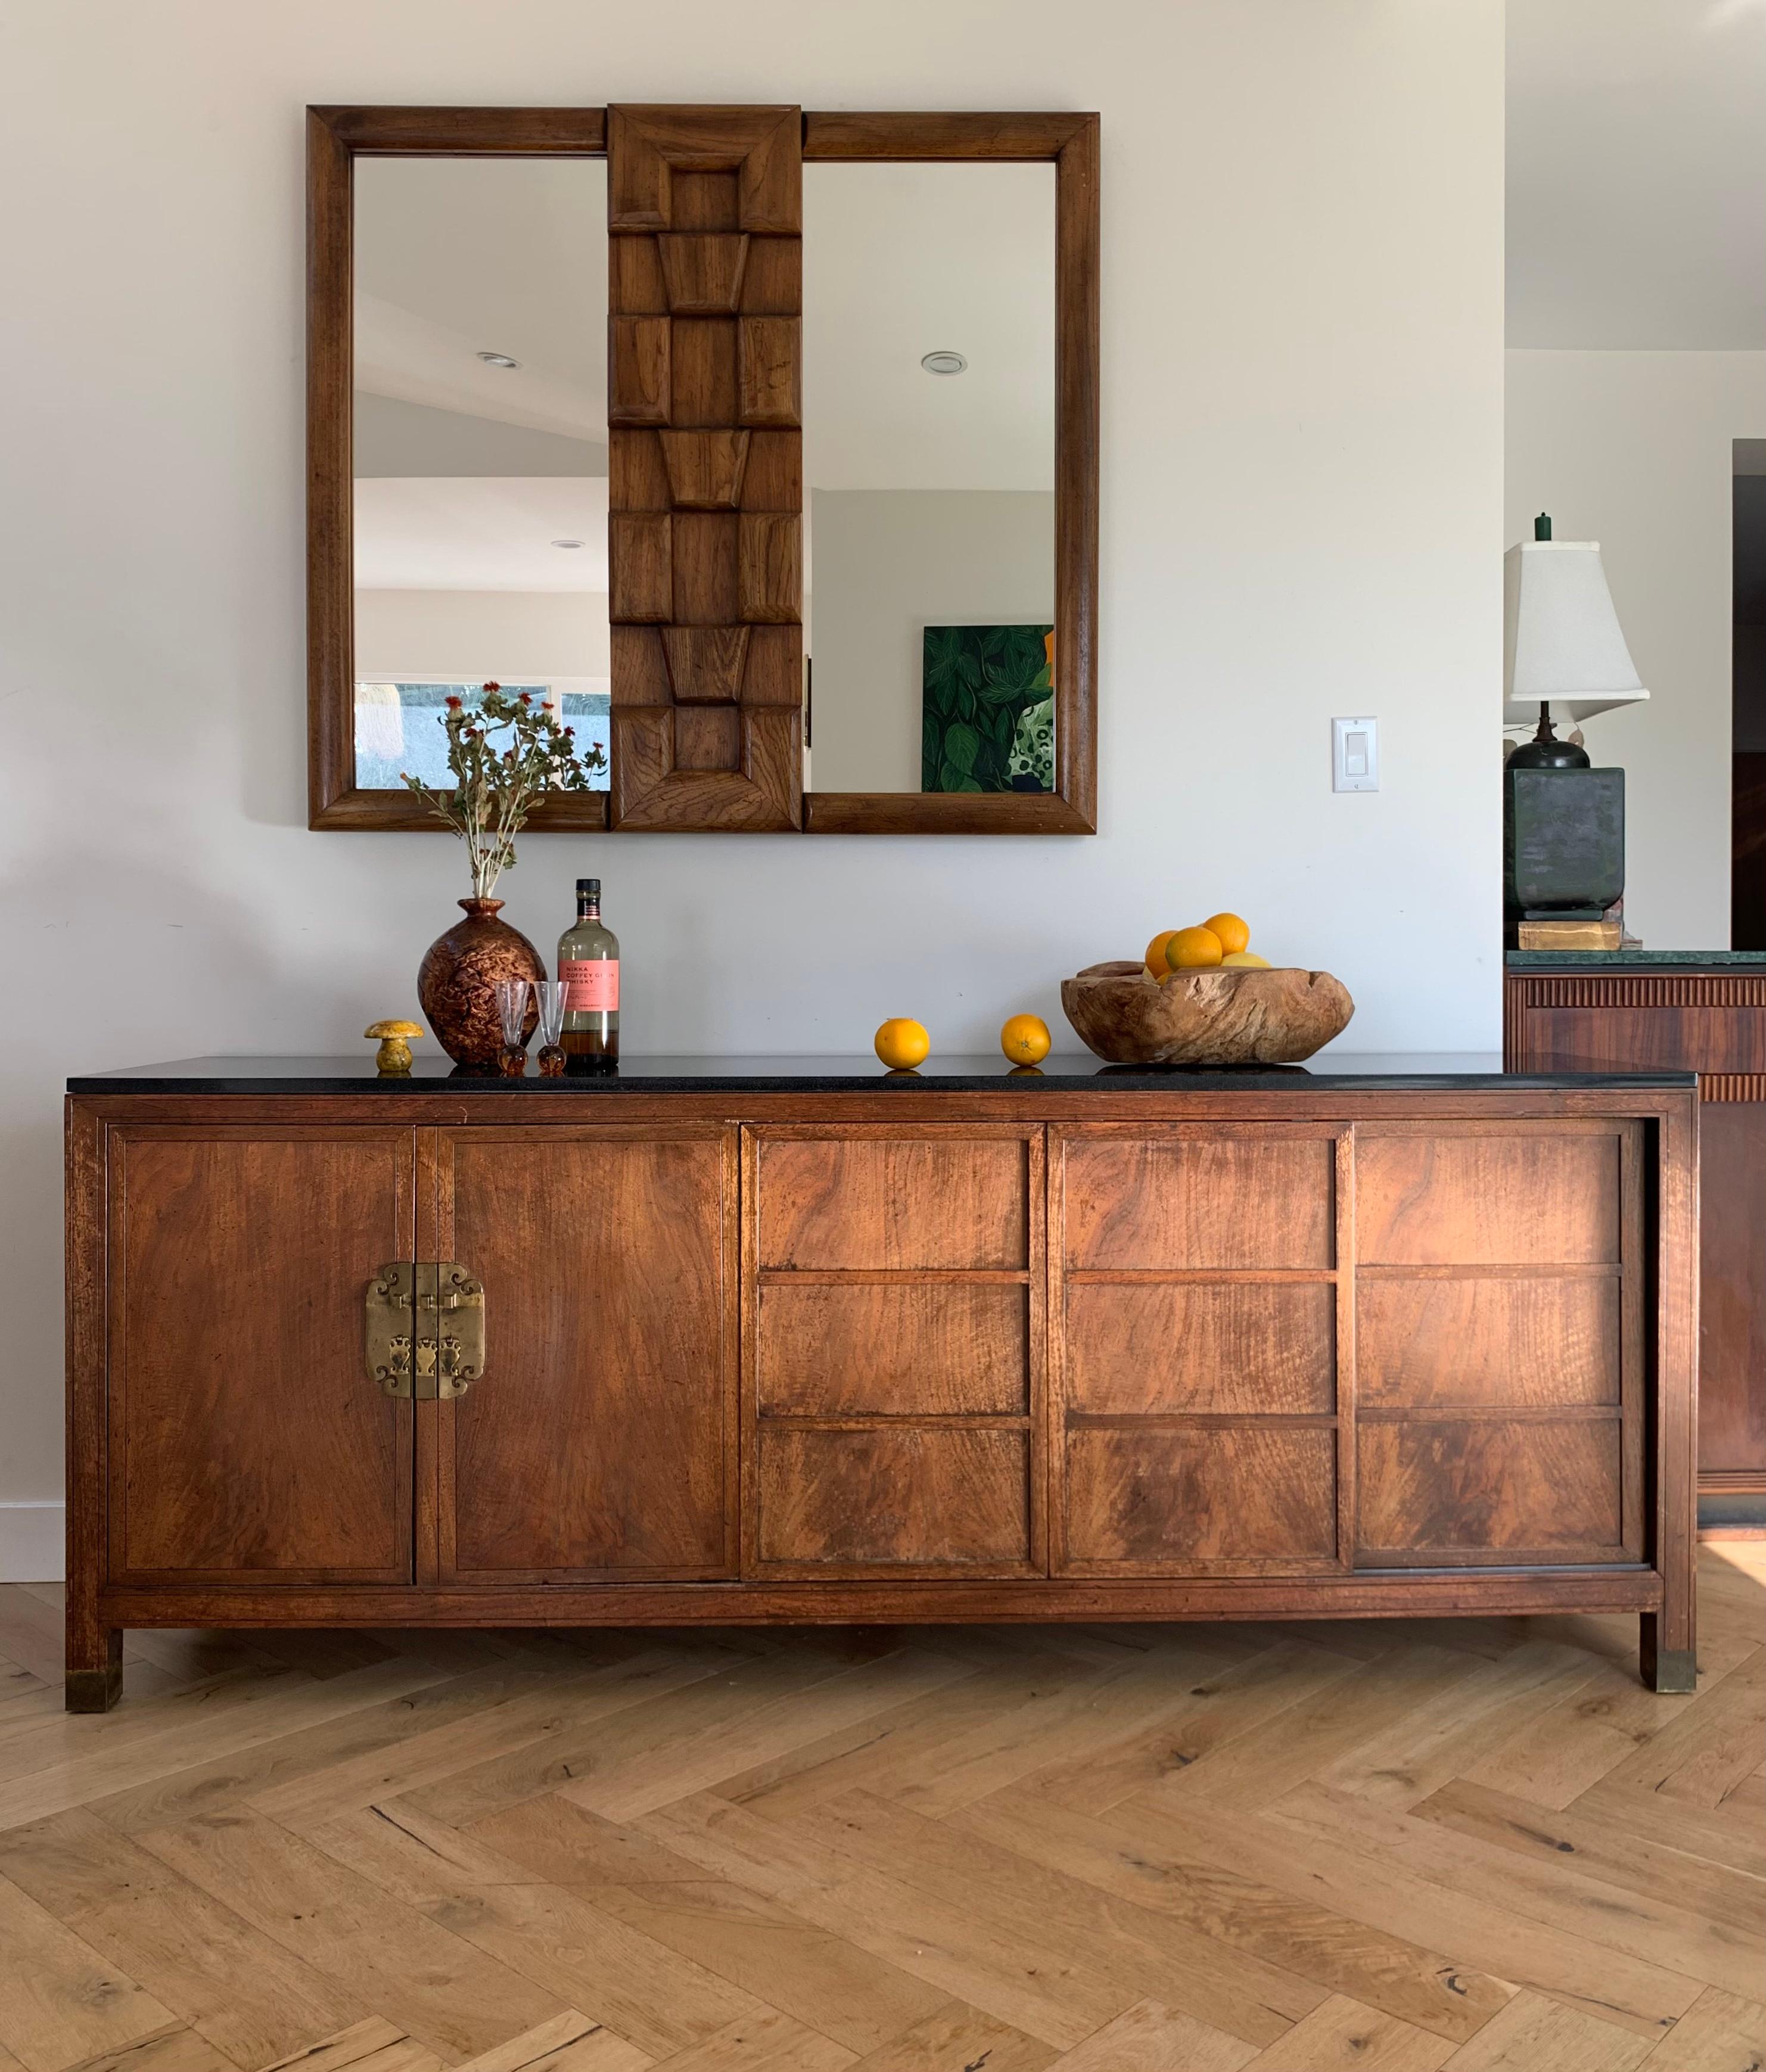 A stately mahogany wood credenza / sideboard / buffet with brass accents and granite top by Baker Furniture Company, 1950s. At once rustic and regal, this piece fuses mid century modern sensibilities with far-east oriental detailing. The right side